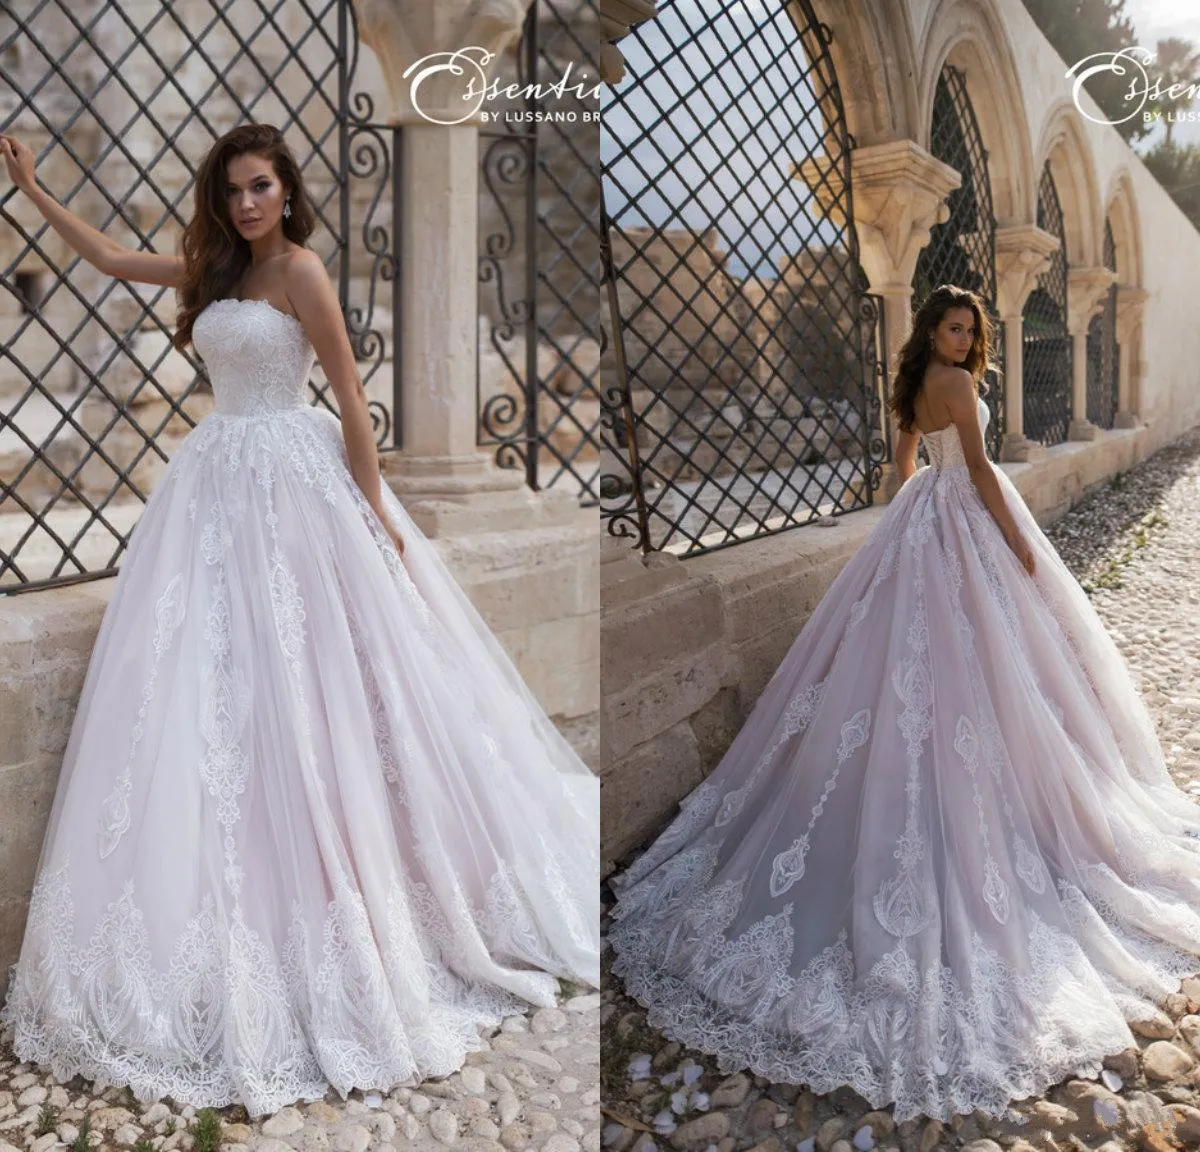 A Strapless Line Wedding Dresses Lace Up Back Appliqued Bridal Gown Sweep Train Beach Country Robe De Mariee ppliqued